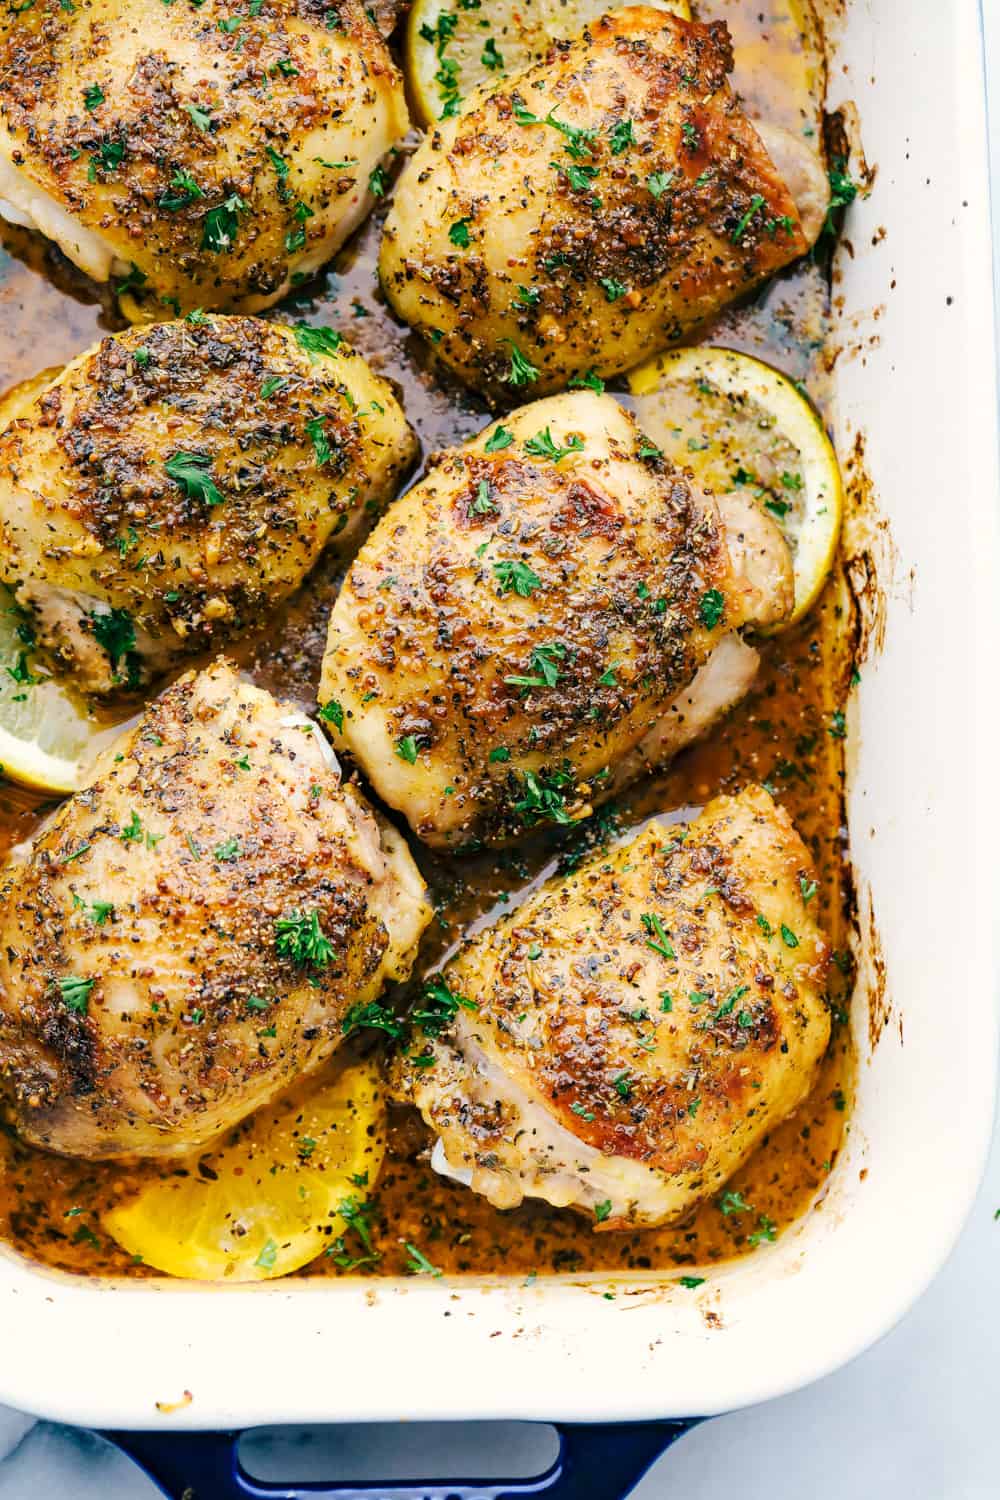 Baked chicken thighs in a baking dish covered in a glaze sauce with lemon slices.